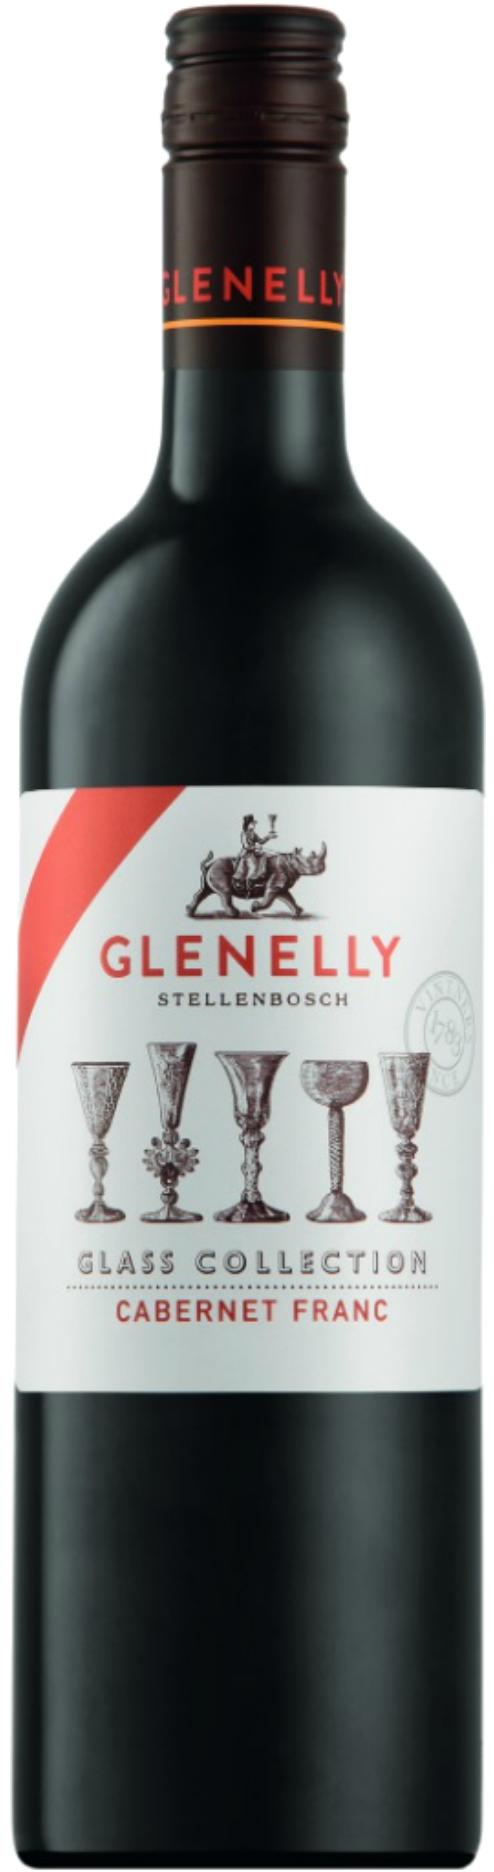 Glenelly Glass Collection Cabernet Franc 2019